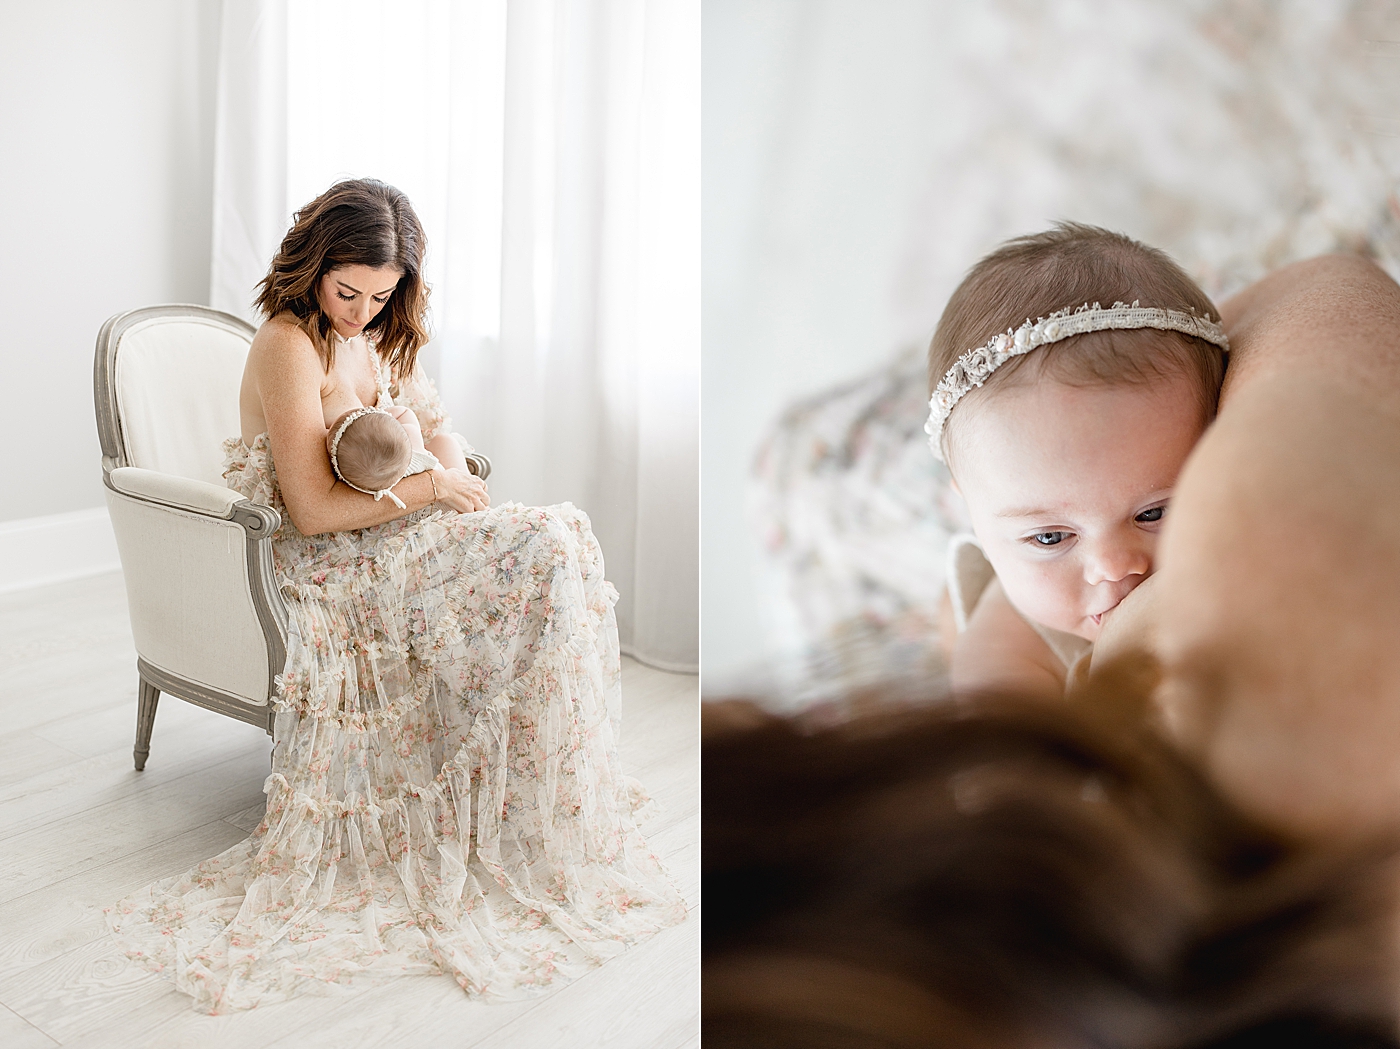 Mom breastfeeding her six month old daughter. Photo by Brittany Elise Photography.